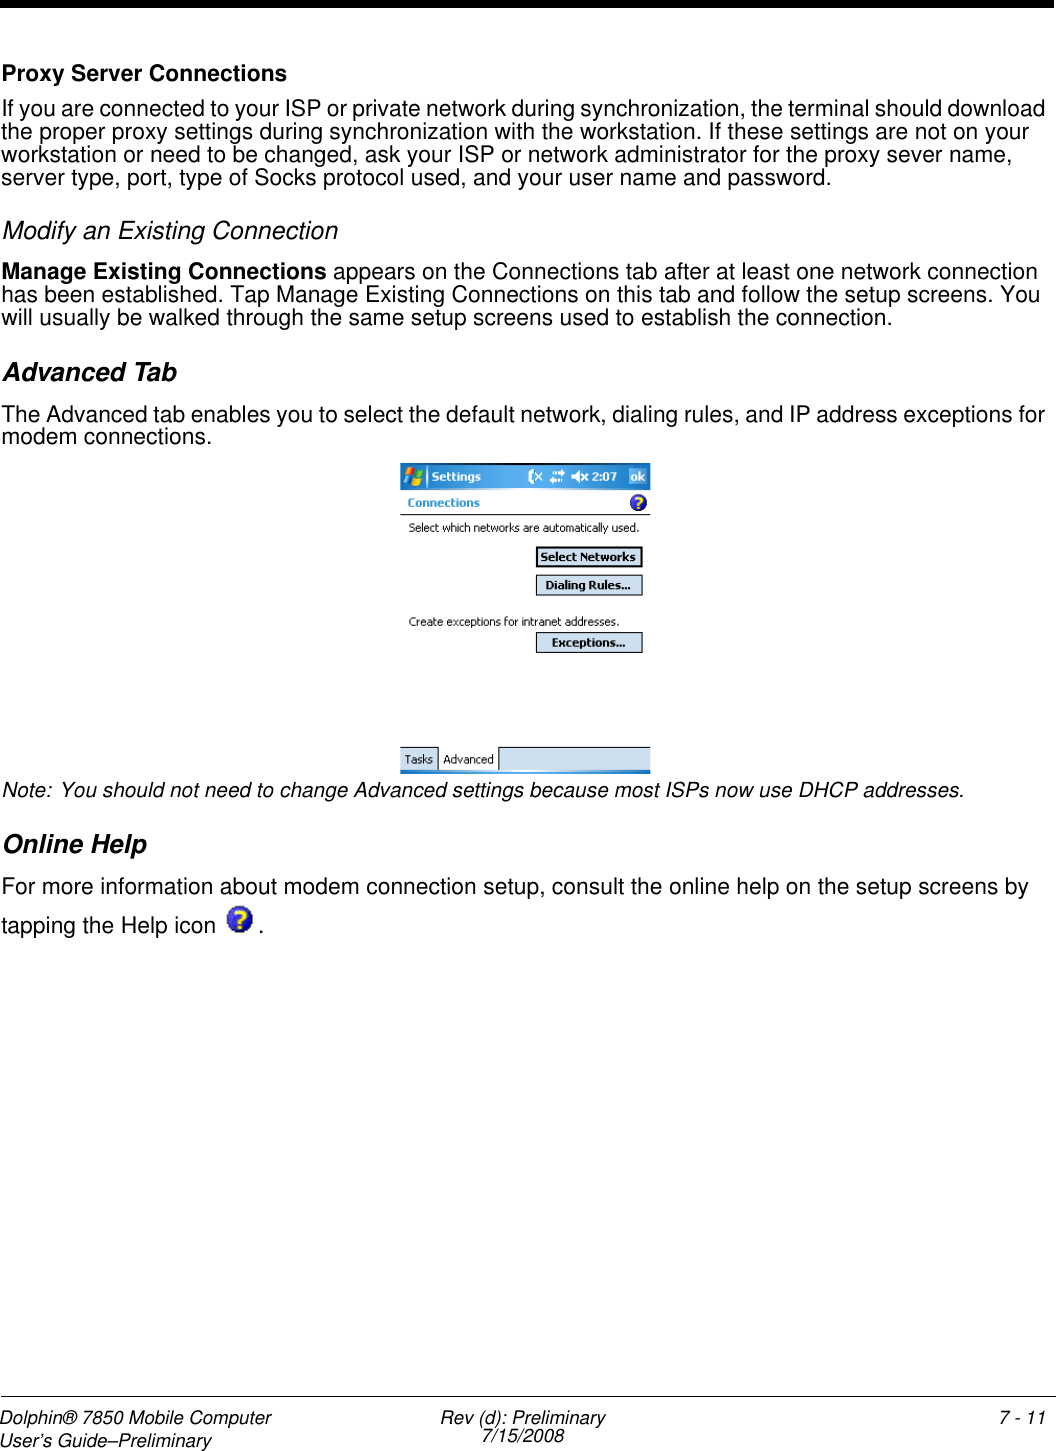 Dolphin® 7850 Mobile Computer  User’s Guide–Preliminary  Rev (d): Preliminary7/15/2008 7 - 11Proxy Server ConnectionsIf you are connected to your ISP or private network during synchronization, the terminal should download the proper proxy settings during synchronization with the workstation. If these settings are not on your workstation or need to be changed, ask your ISP or network administrator for the proxy sever name, server type, port, type of Socks protocol used, and your user name and password.Modify an Existing ConnectionManage Existing Connections appears on the Connections tab after at least one network connection has been established. Tap Manage Existing Connections on this tab and follow the setup screens. You will usually be walked through the same setup screens used to establish the connection.Advanced TabThe Advanced tab enables you to select the default network, dialing rules, and IP address exceptions for modem connections.Note: You should not need to change Advanced settings because most ISPs now use DHCP addresses.Online HelpFor more information about modem connection setup, consult the online help on the setup screens by tapping the Help icon  .